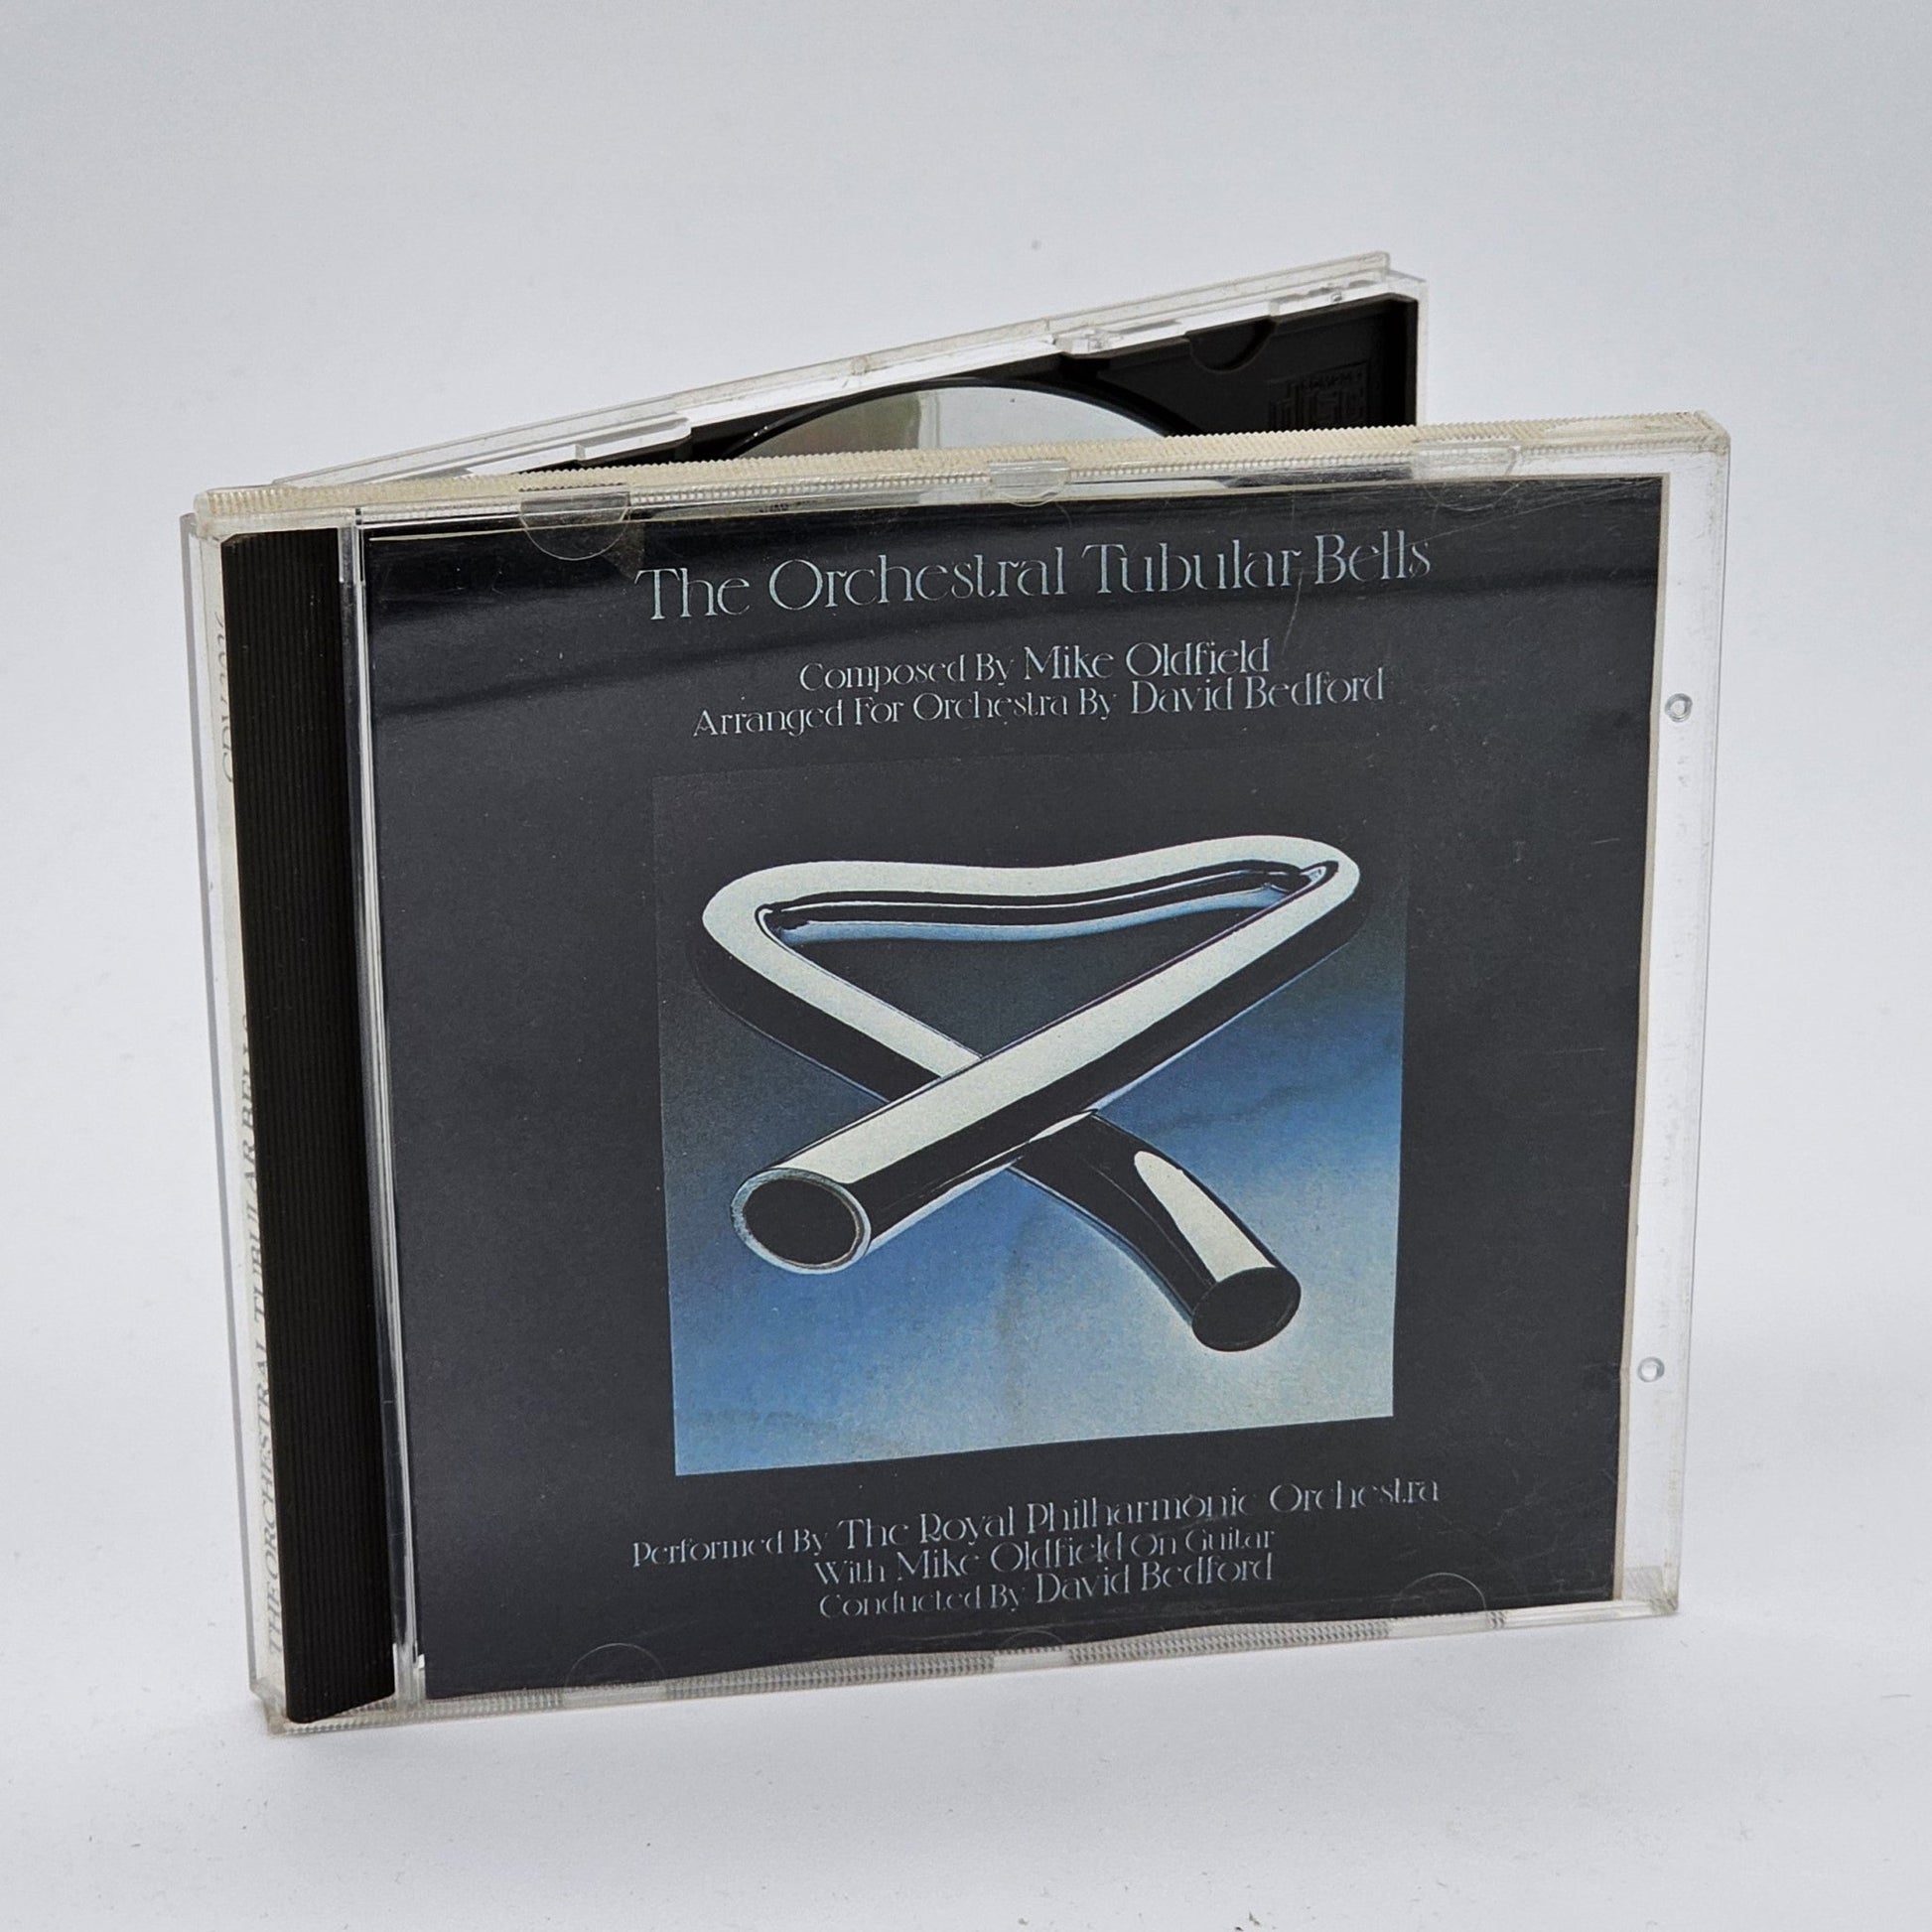 Virgin Records - Mike Oldfield | The Orchestral Tubular Bells | CD - Compact Disc - Steady Bunny Shop